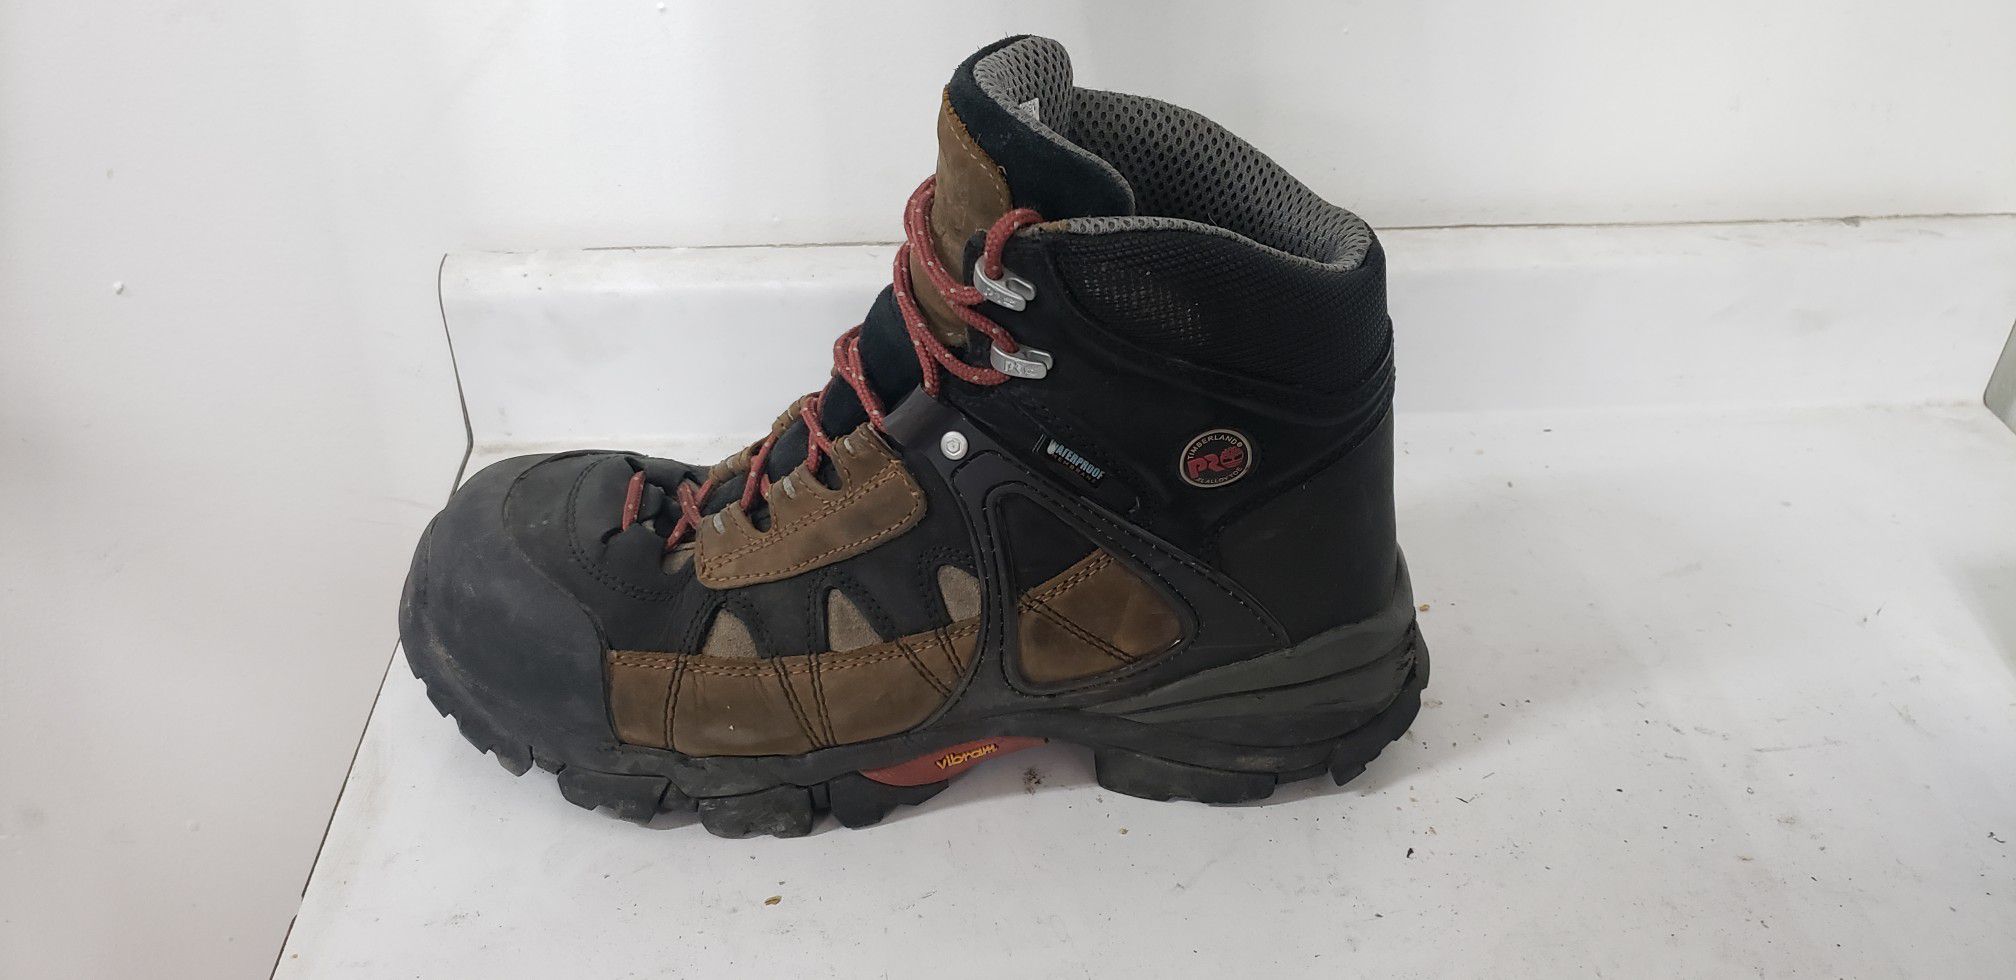 MEN'S TIMBERLAND PRO® HYPERION 6" ALLOY TOE WORK BOOTS